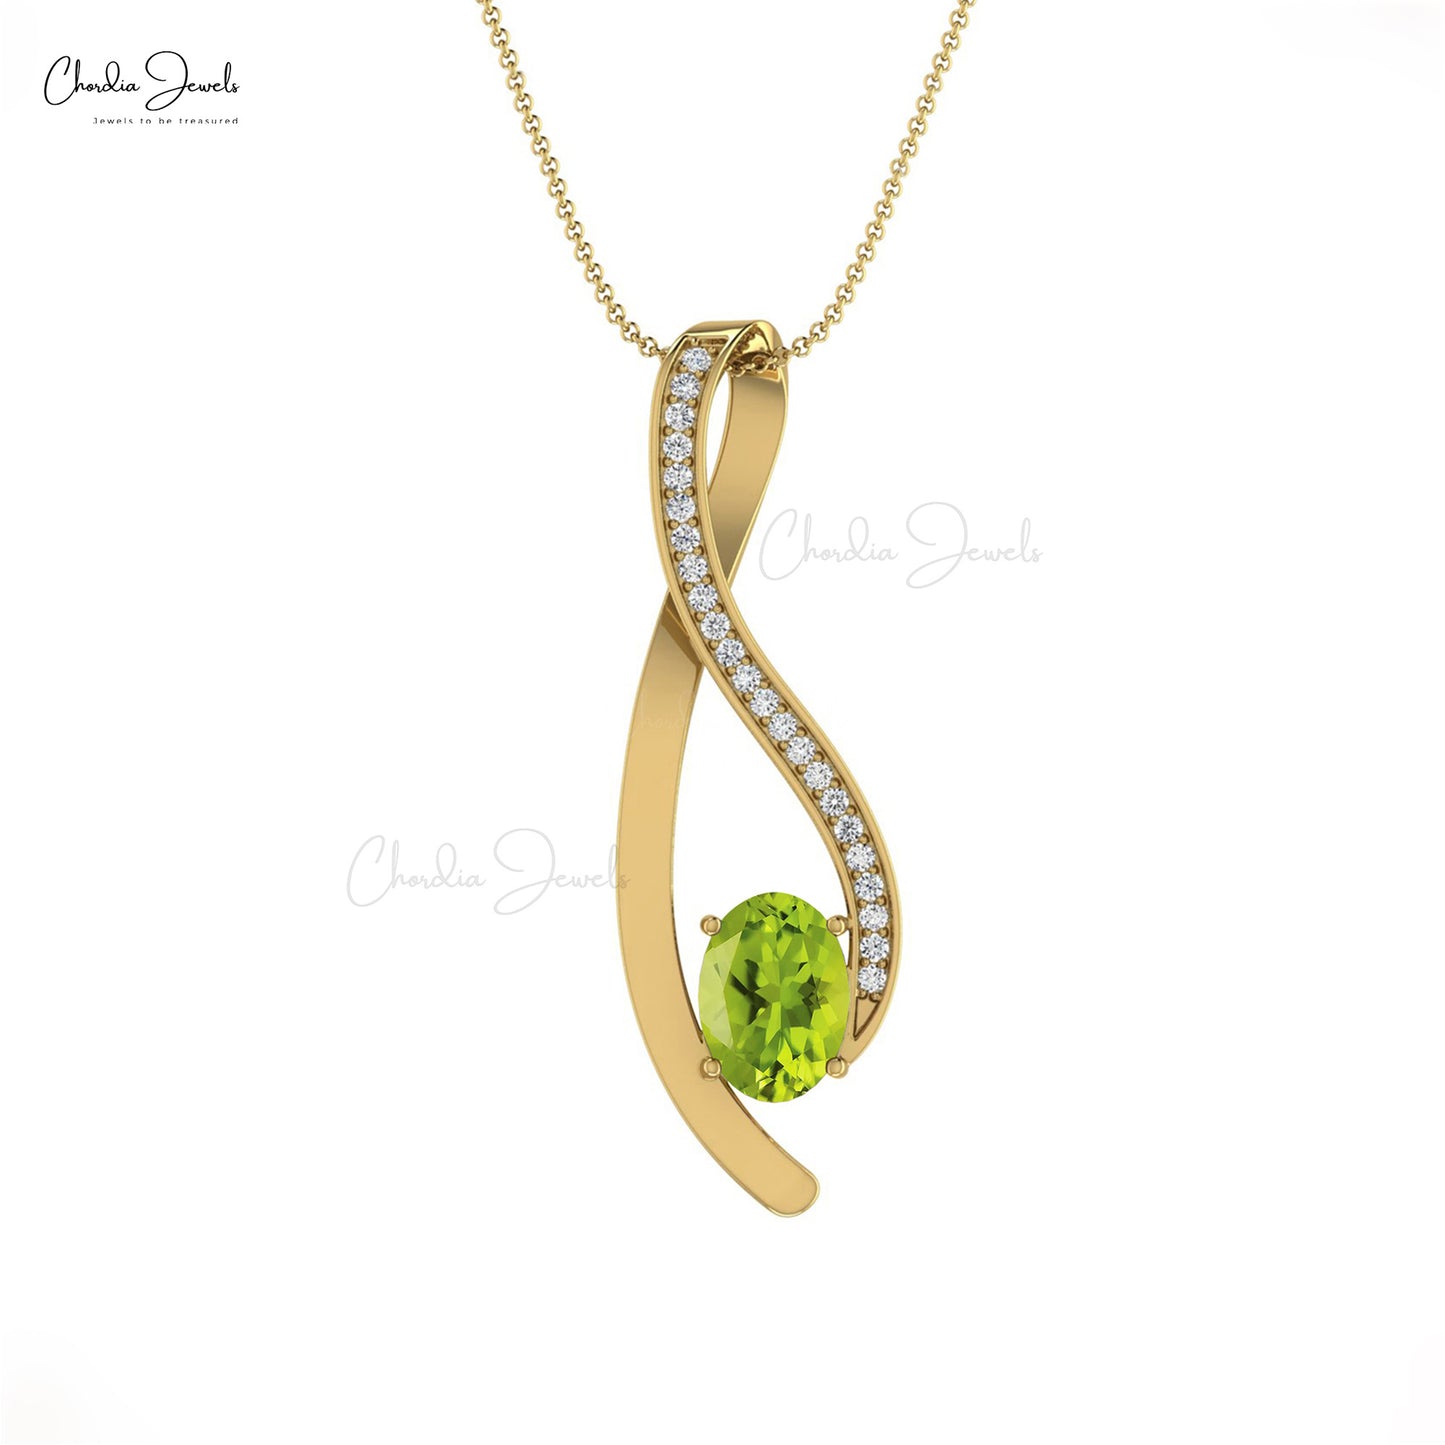 AAA Quality 6x4mm Oval Cut 0.90 Ct August Birthstone Peridot Gemstone Overlay Pendant 14k Real Gold Pave Set Diamond Curve Pendant Necklace Anniversary Gift For Wife